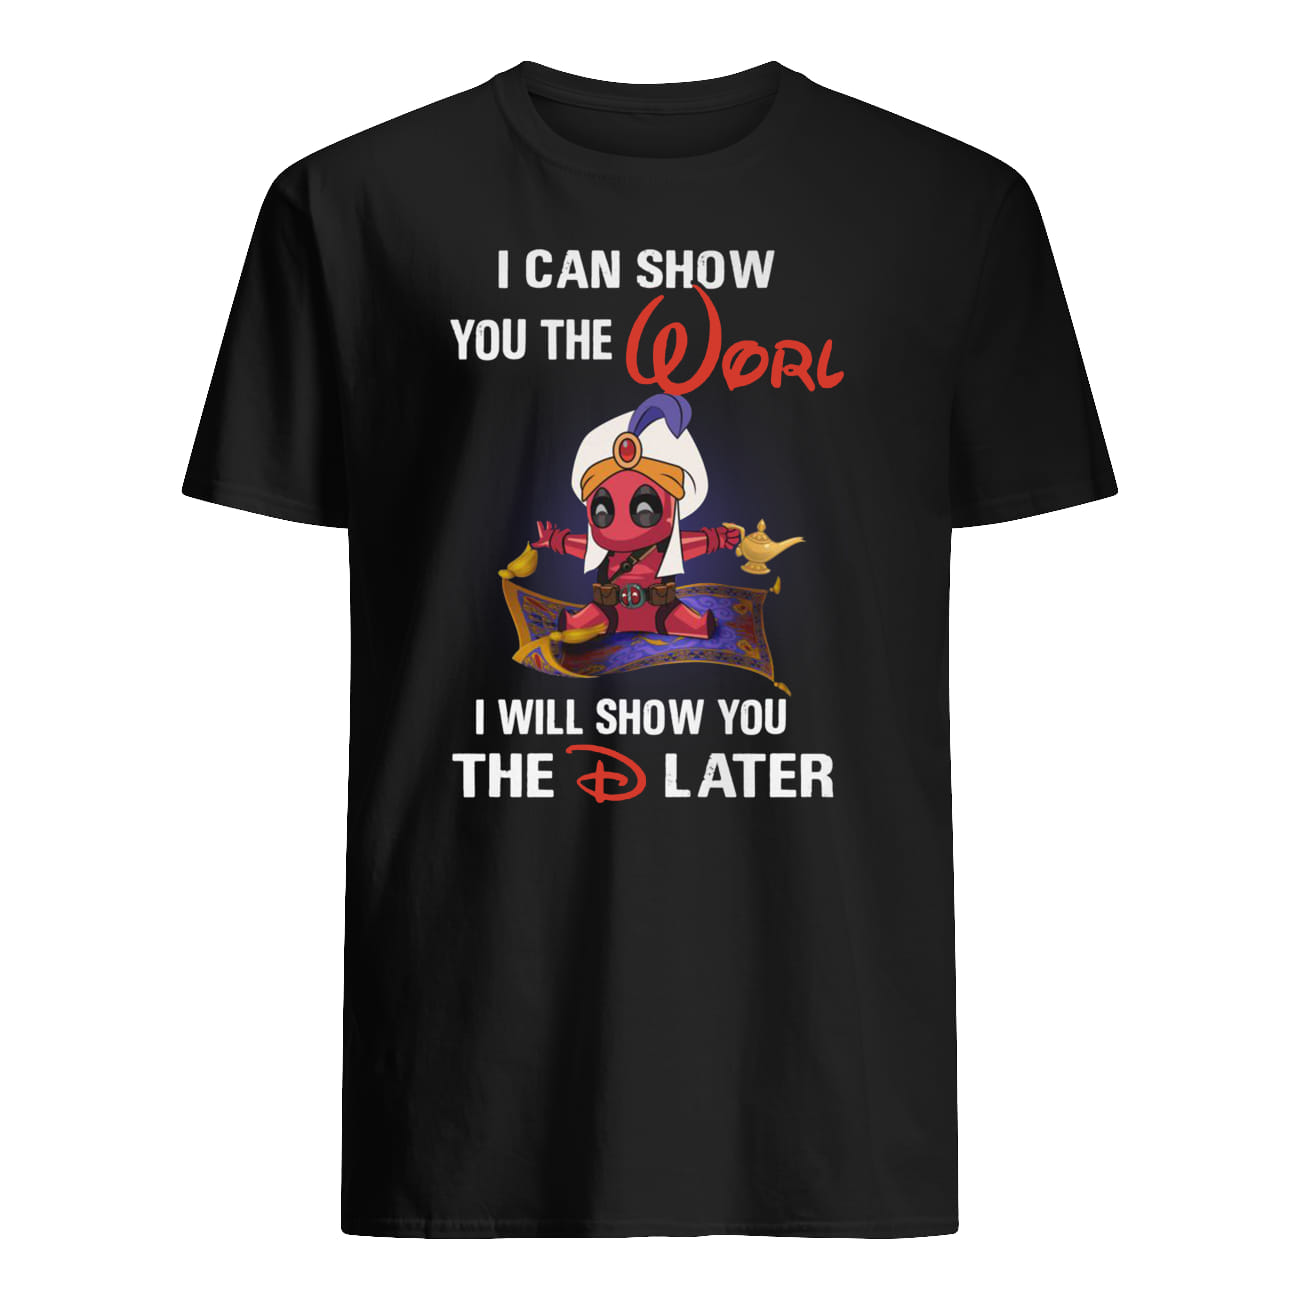 Deadpool aladdin I can show you the worl I will show you the D later guy shirt